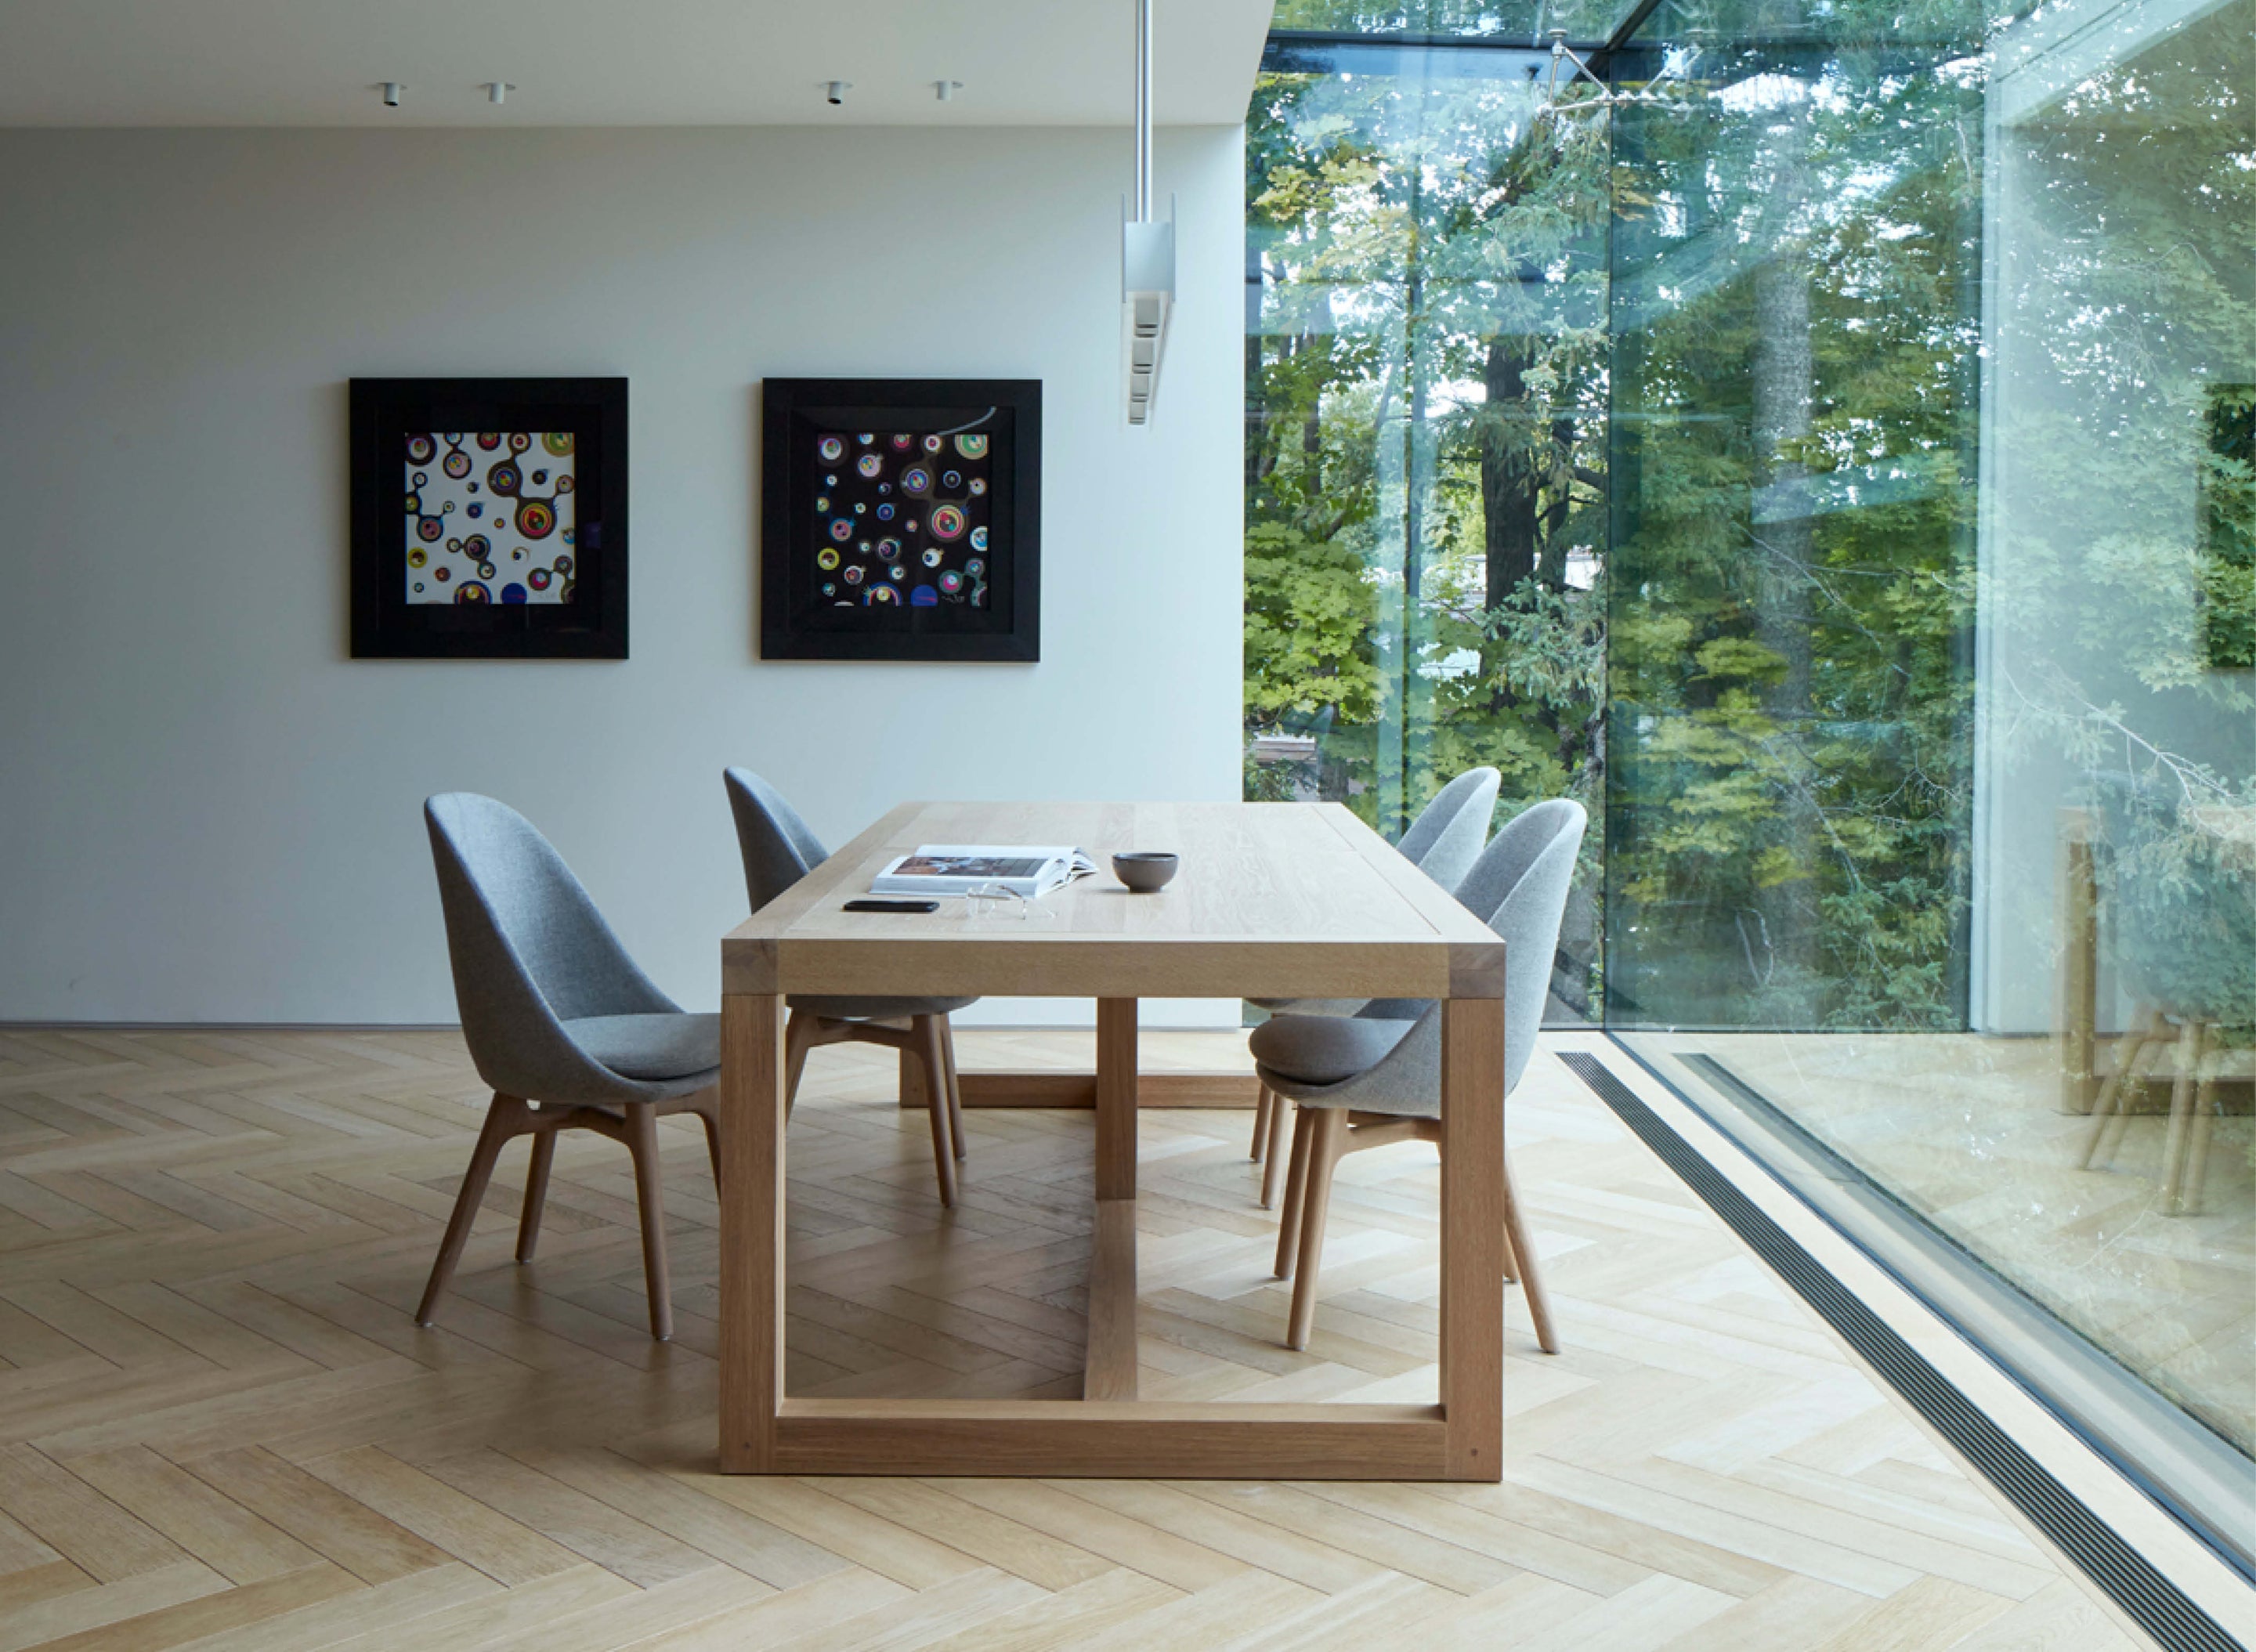 an interior view with midcentury modern furniture and northern wide wood planks on the floor